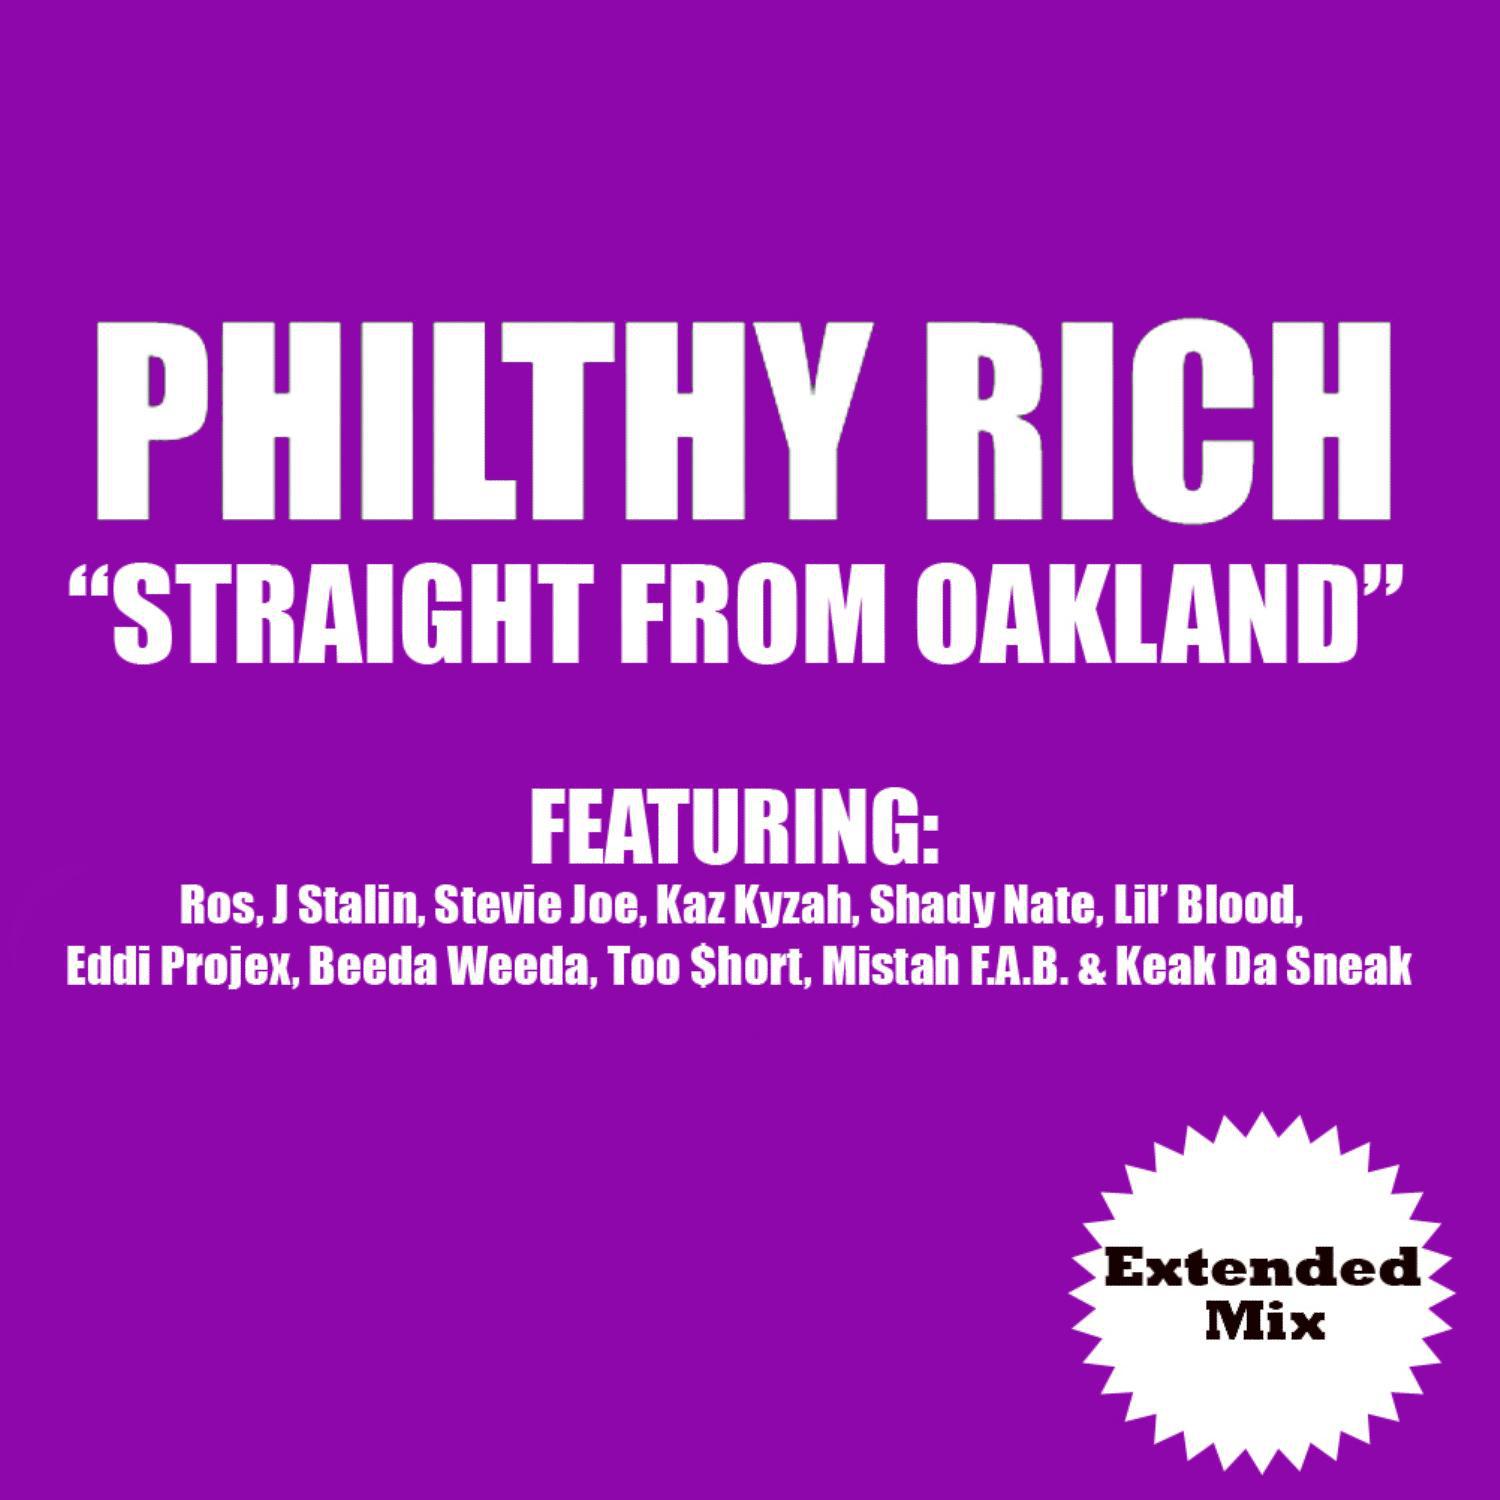 Philthy Rich - Straight from Oakland